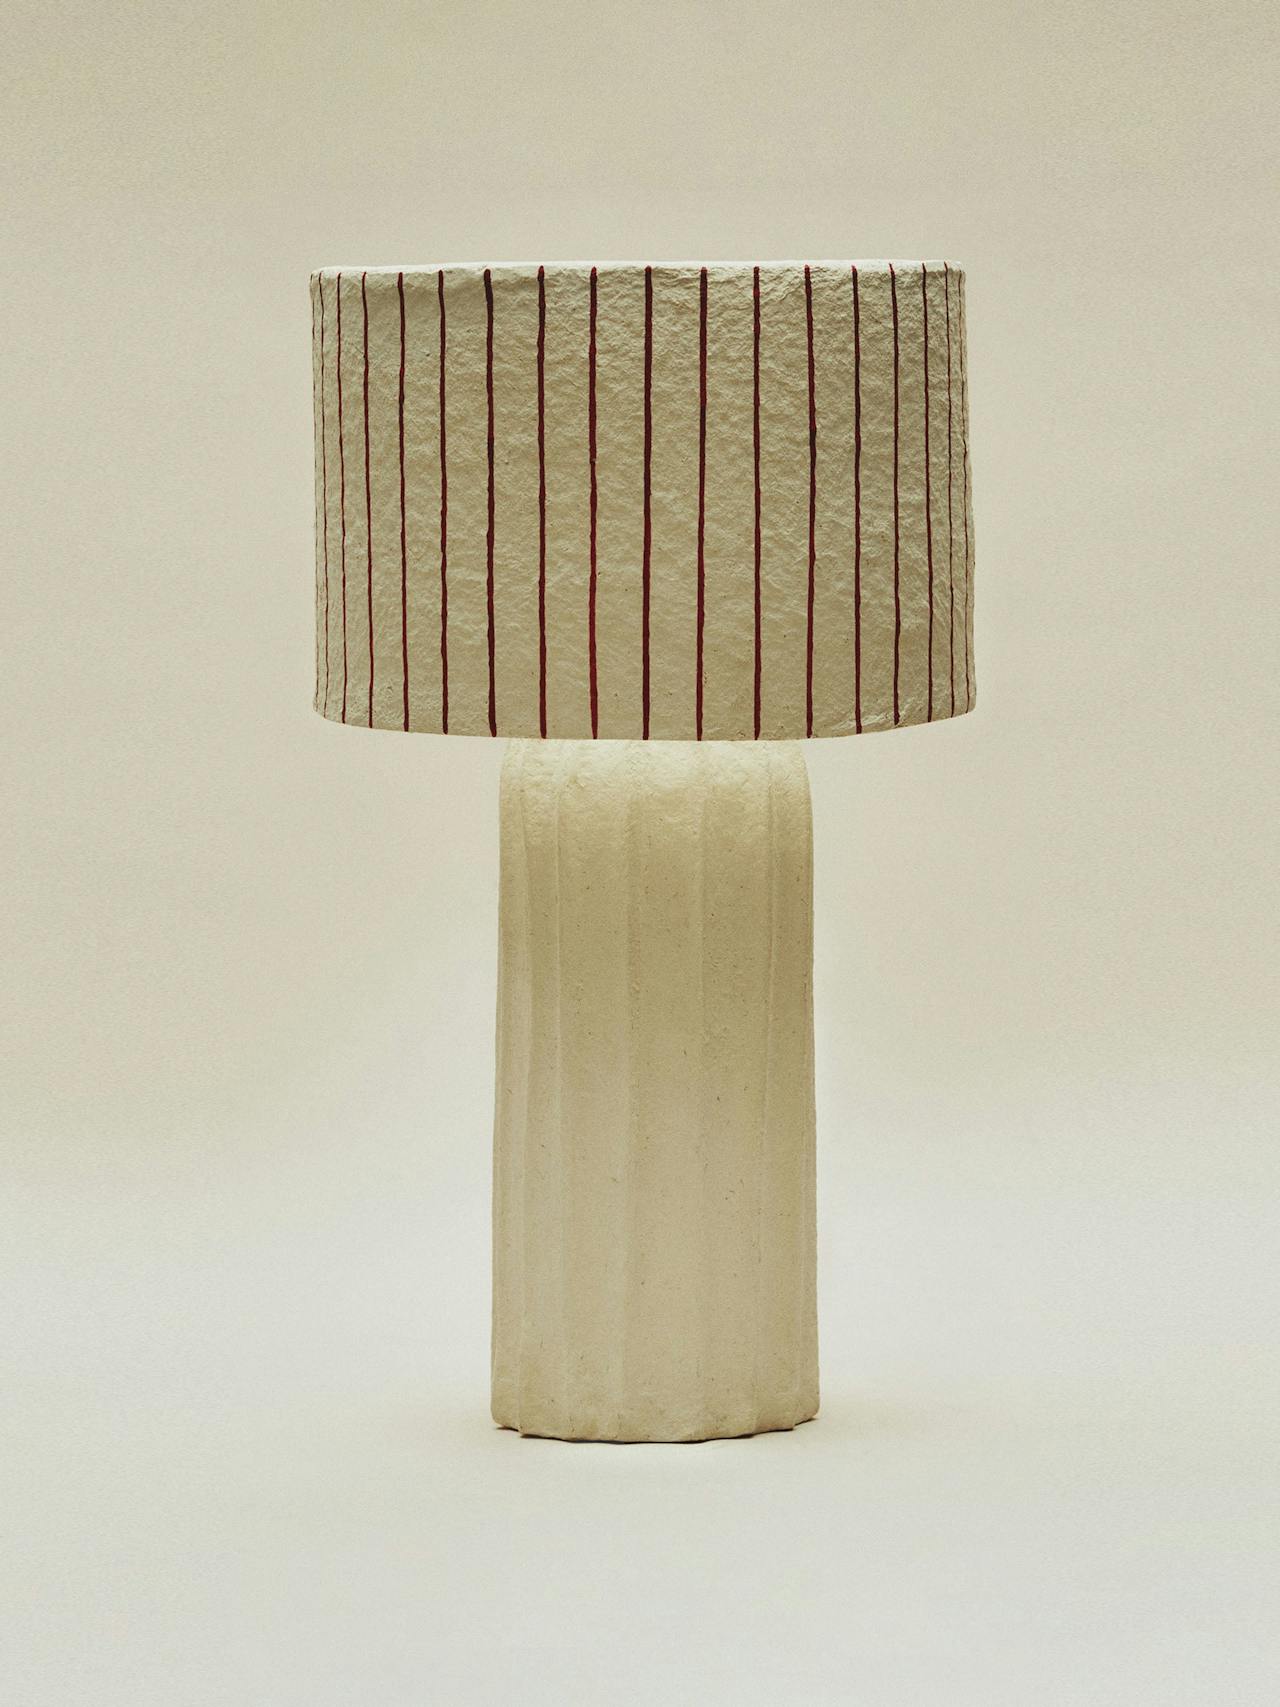 Papier-mâché table lamp with striped shade